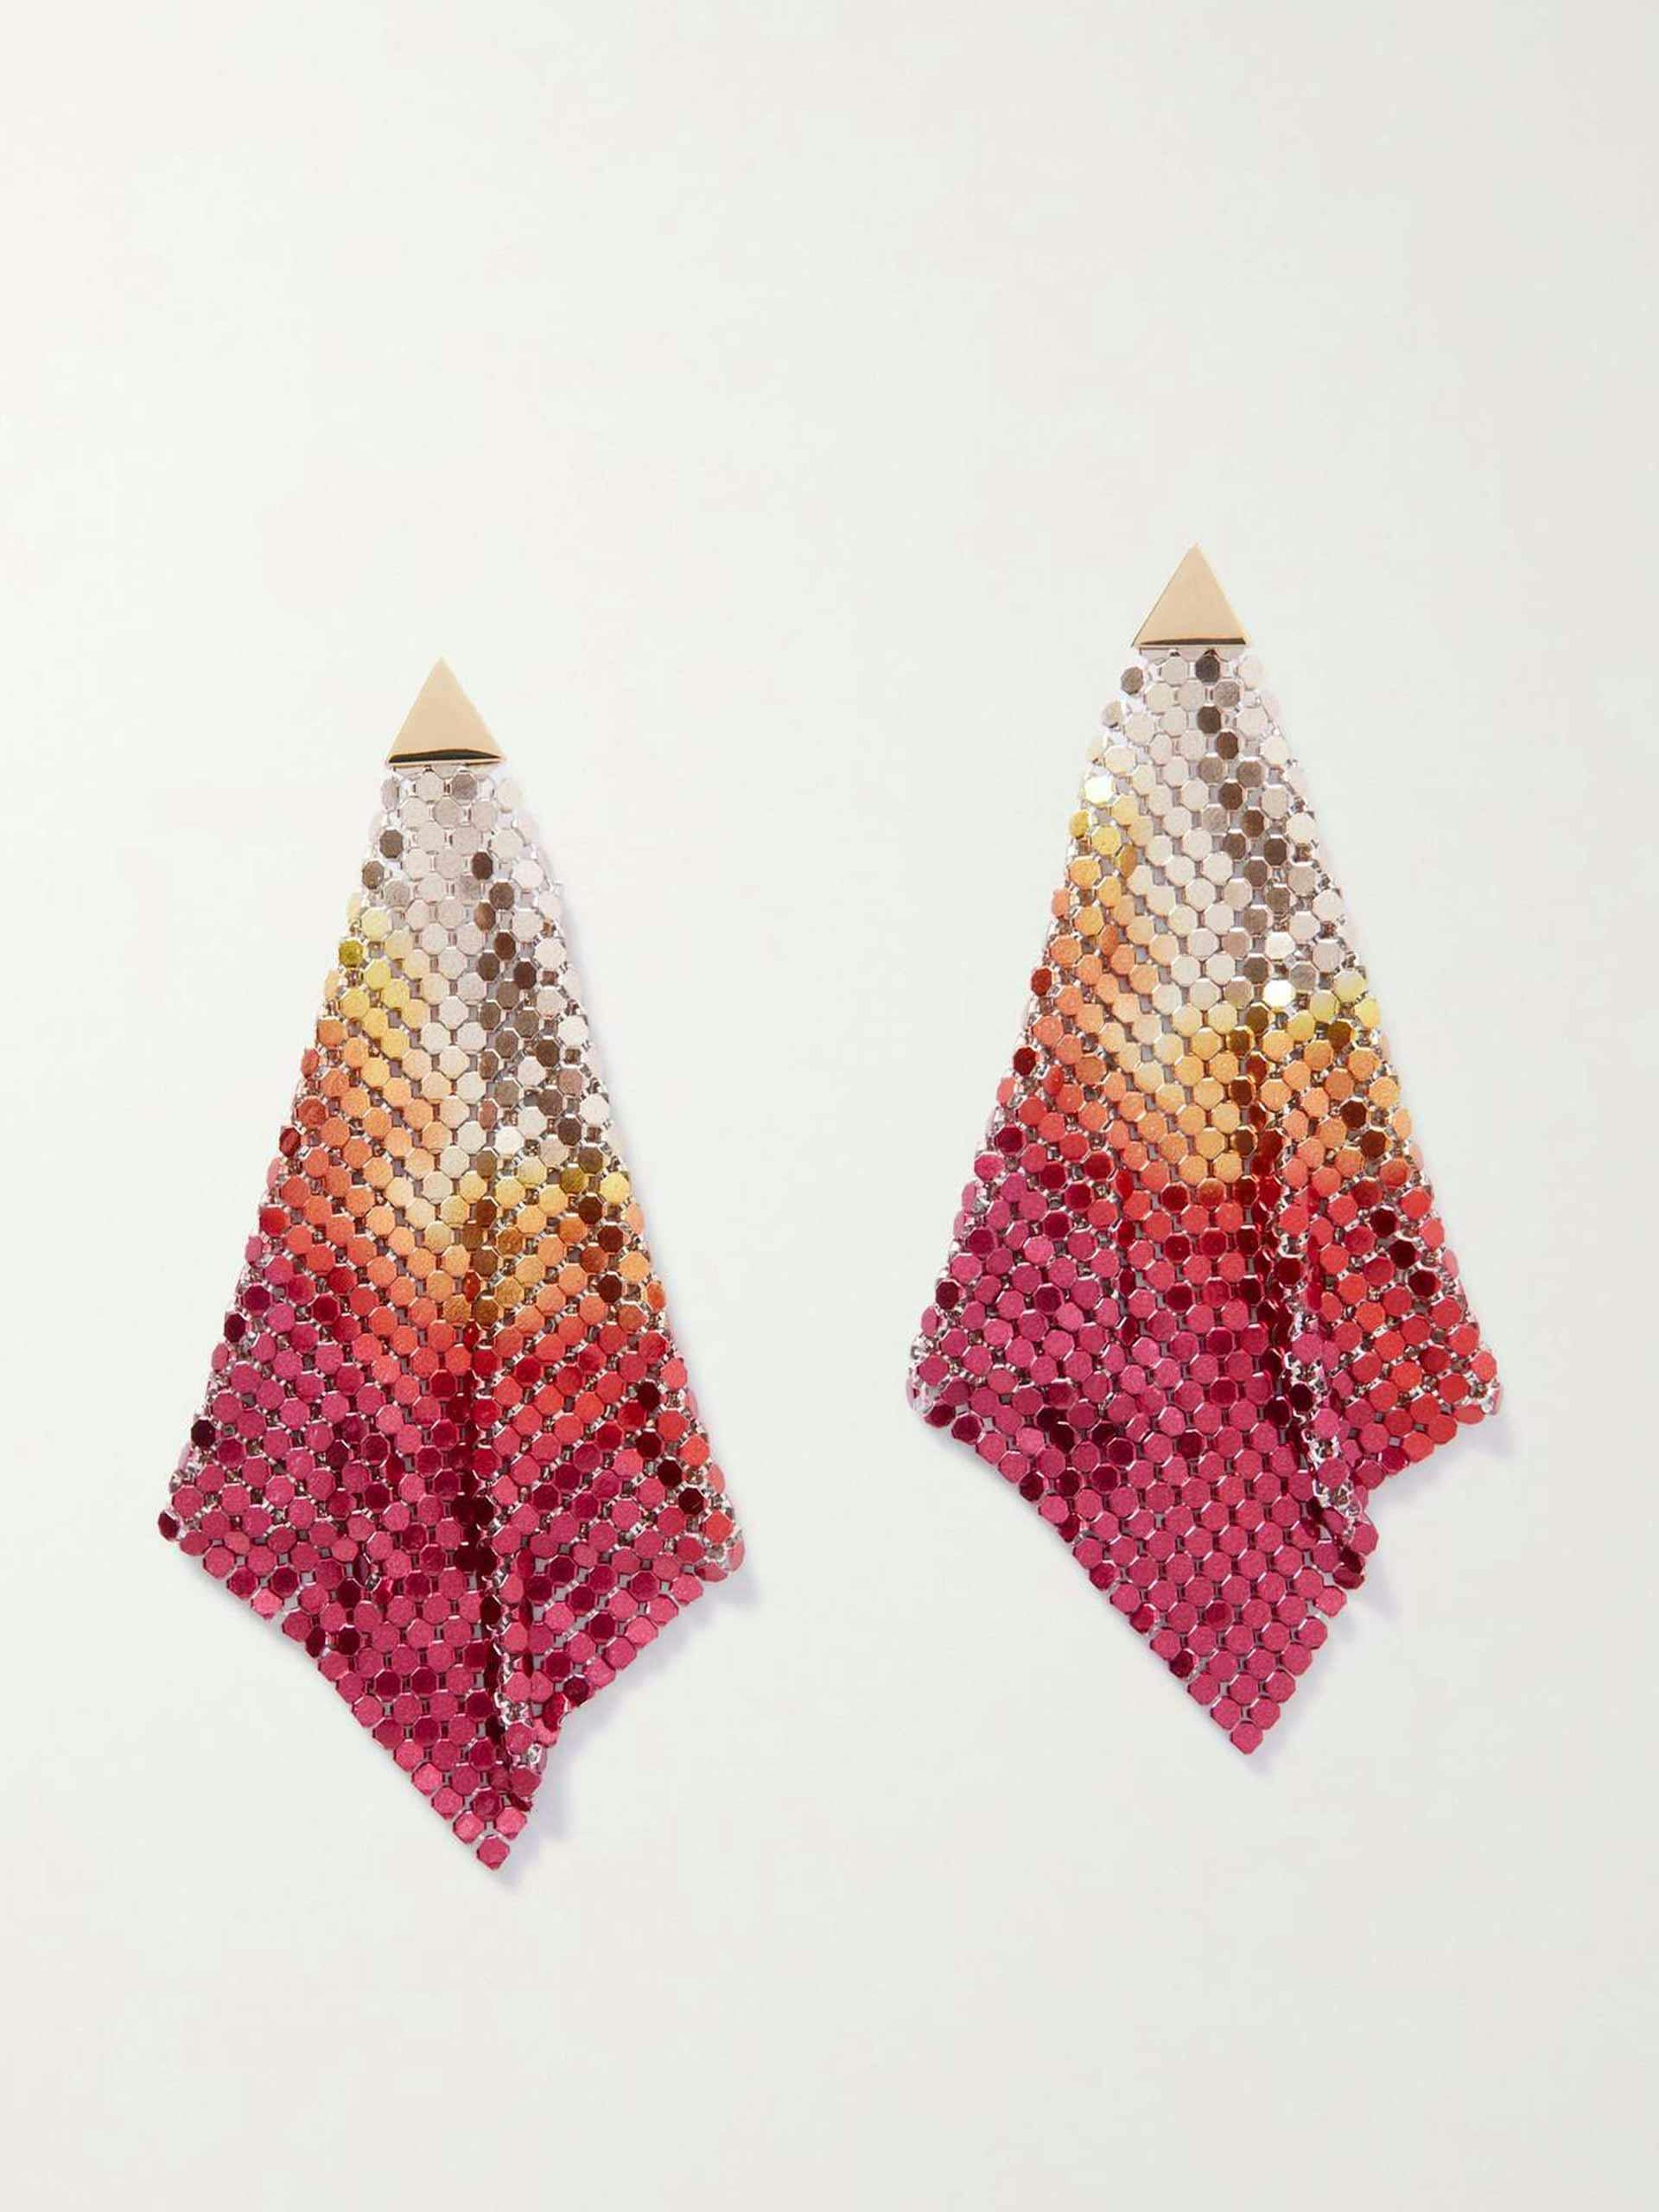 Sunset-hued chainmail earrings